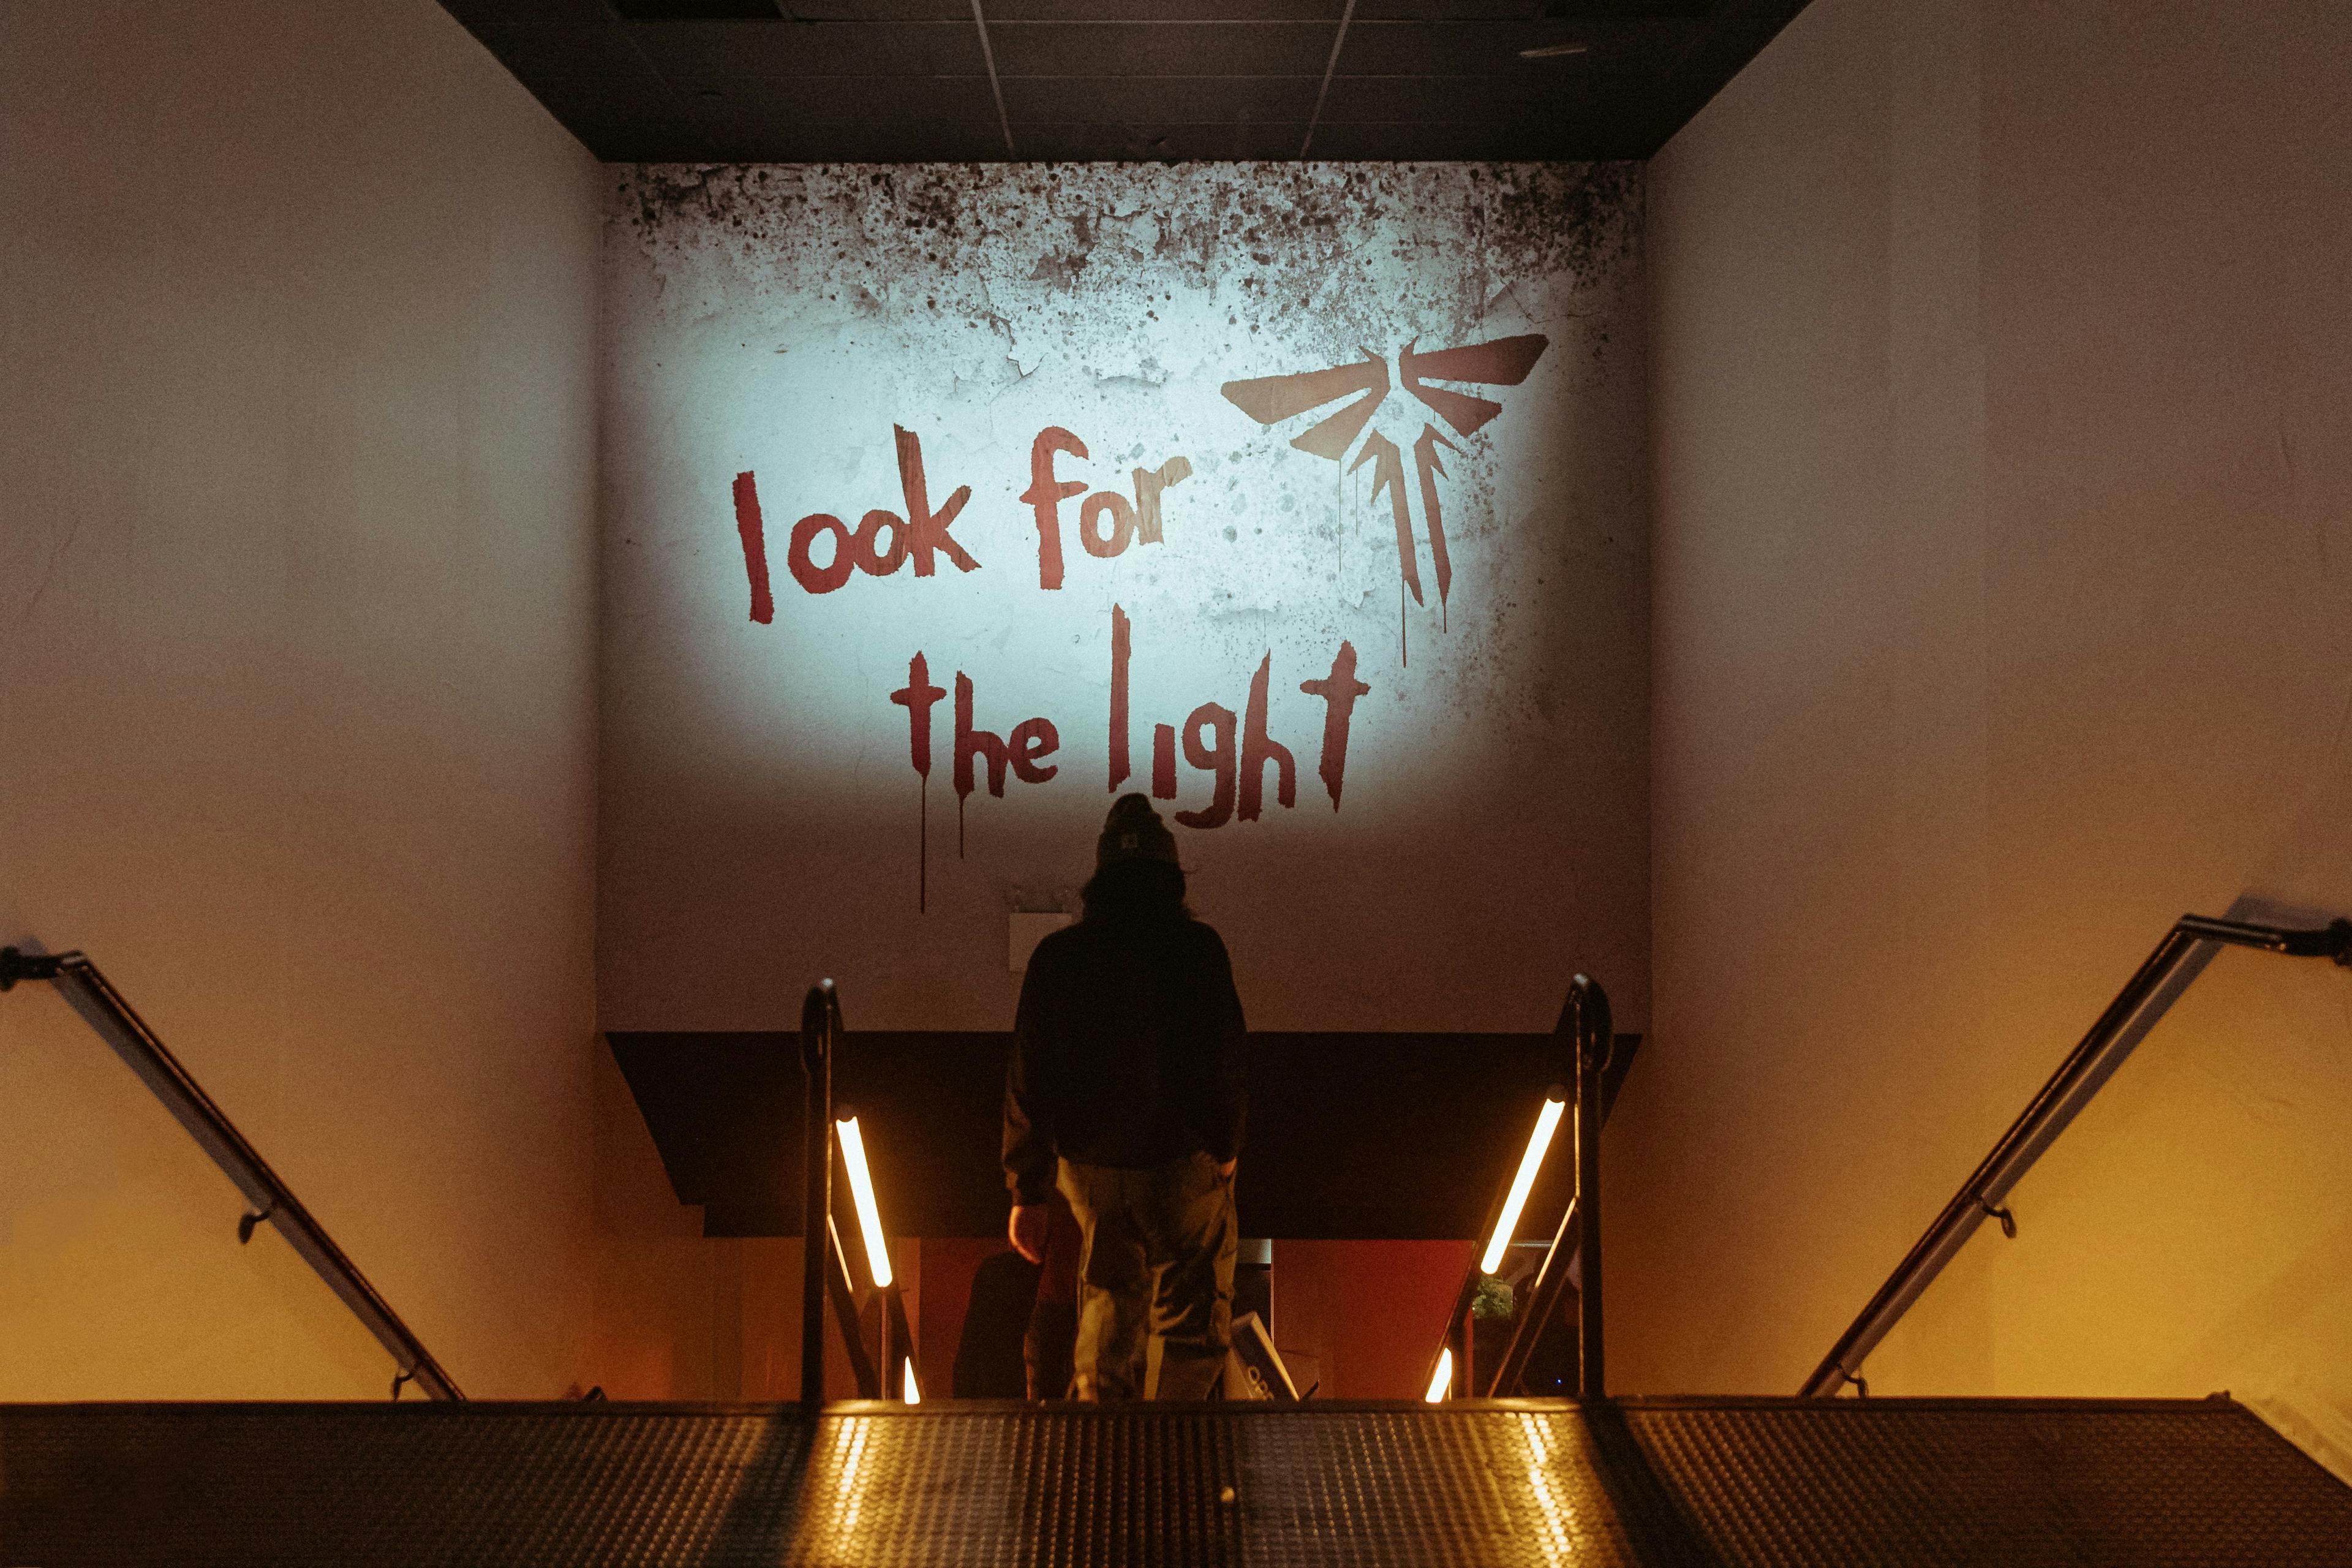 a sign that says "Look for the Light" that was part of "The Last of Us" promo